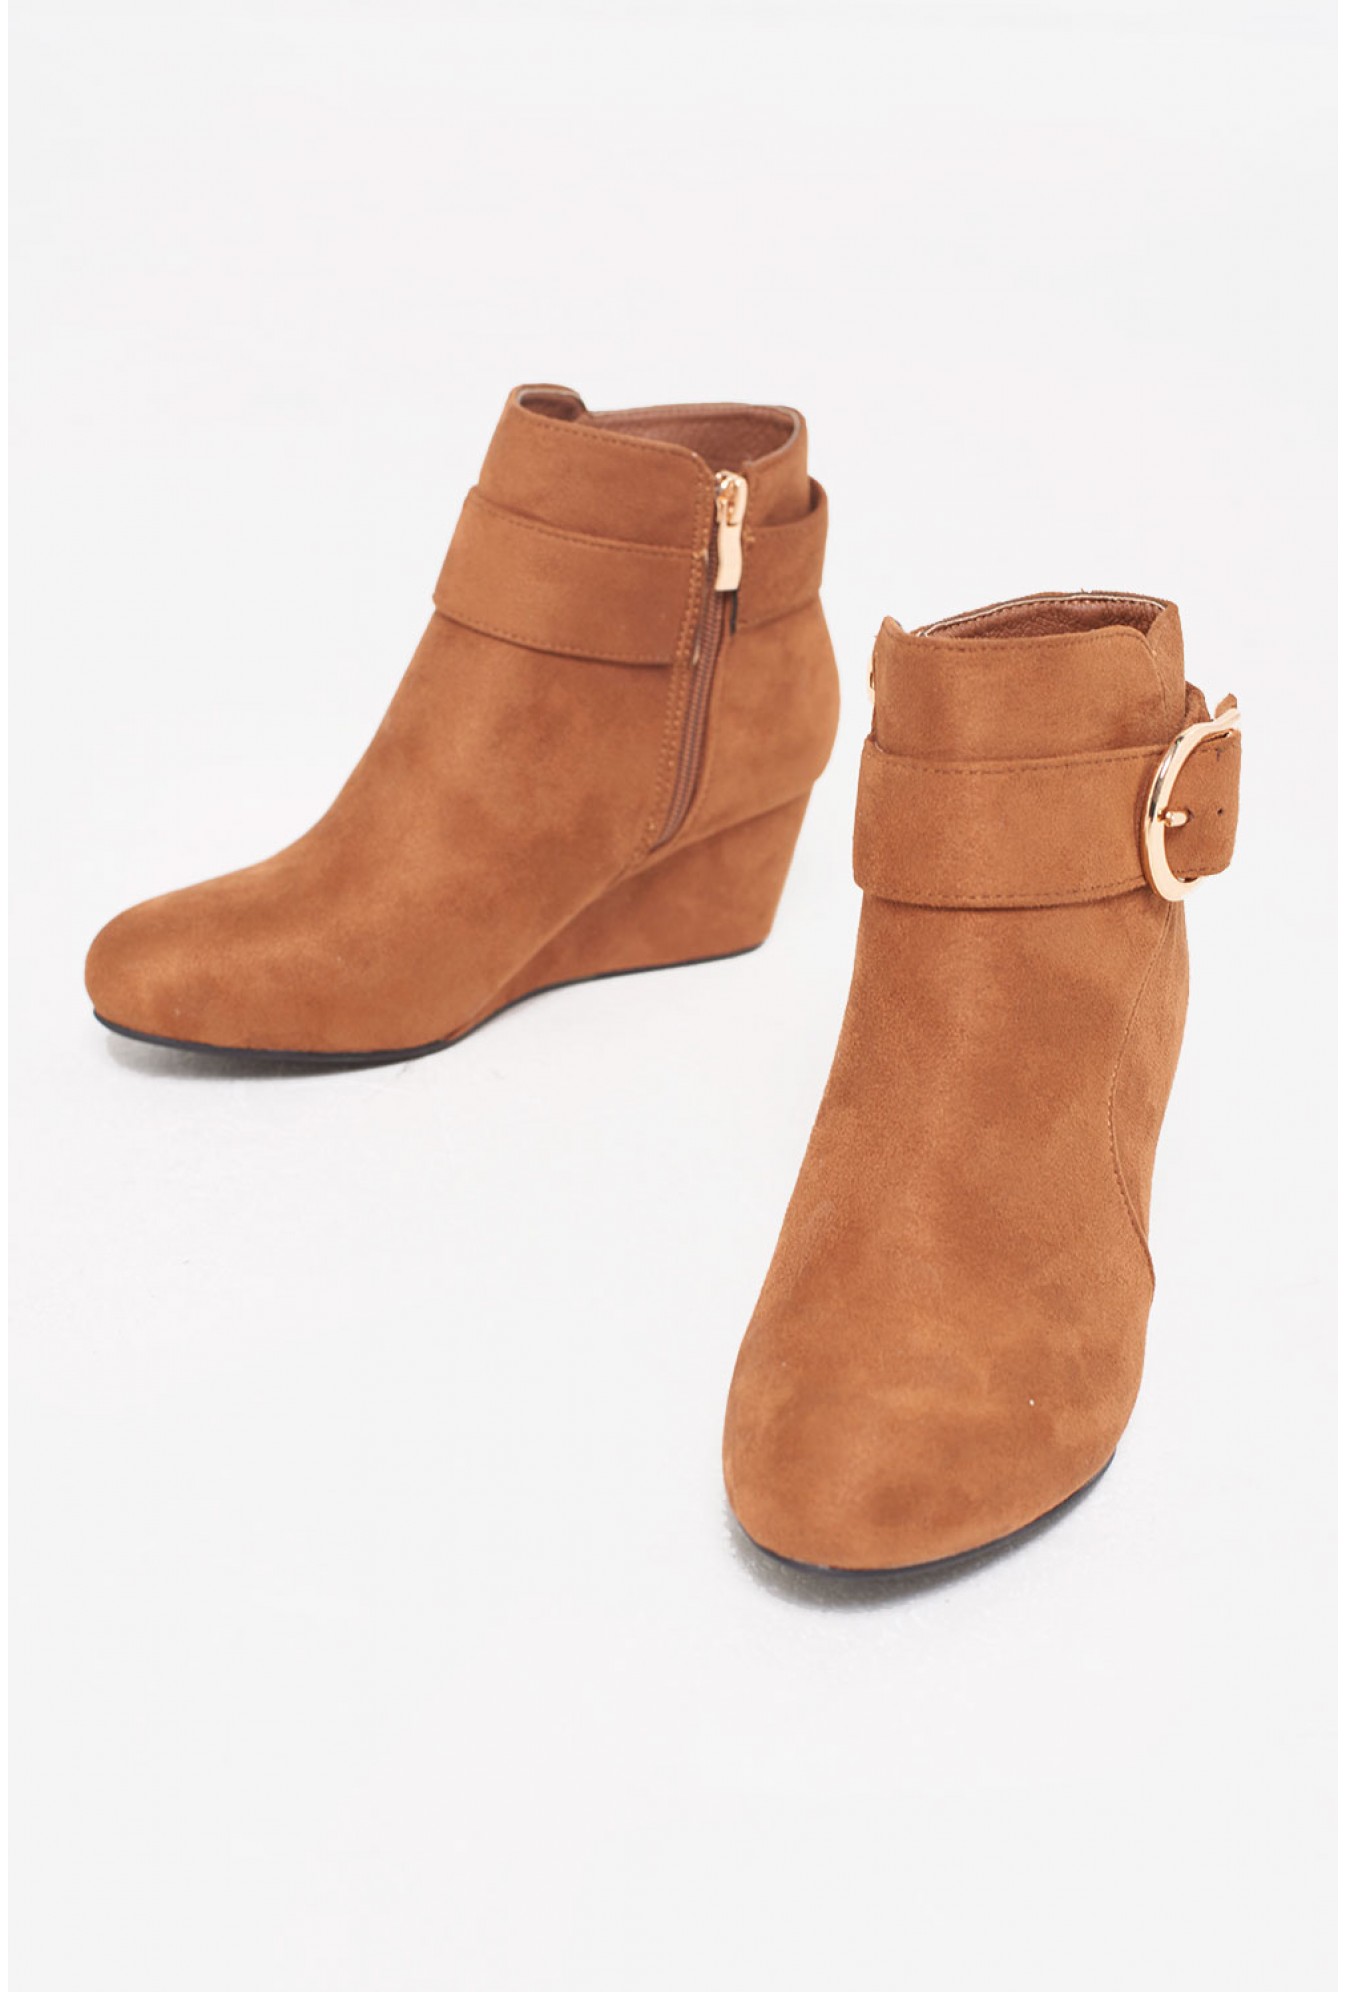 No Doubt Winter Wedge Ankle Boots in Tan | iCLOTHING